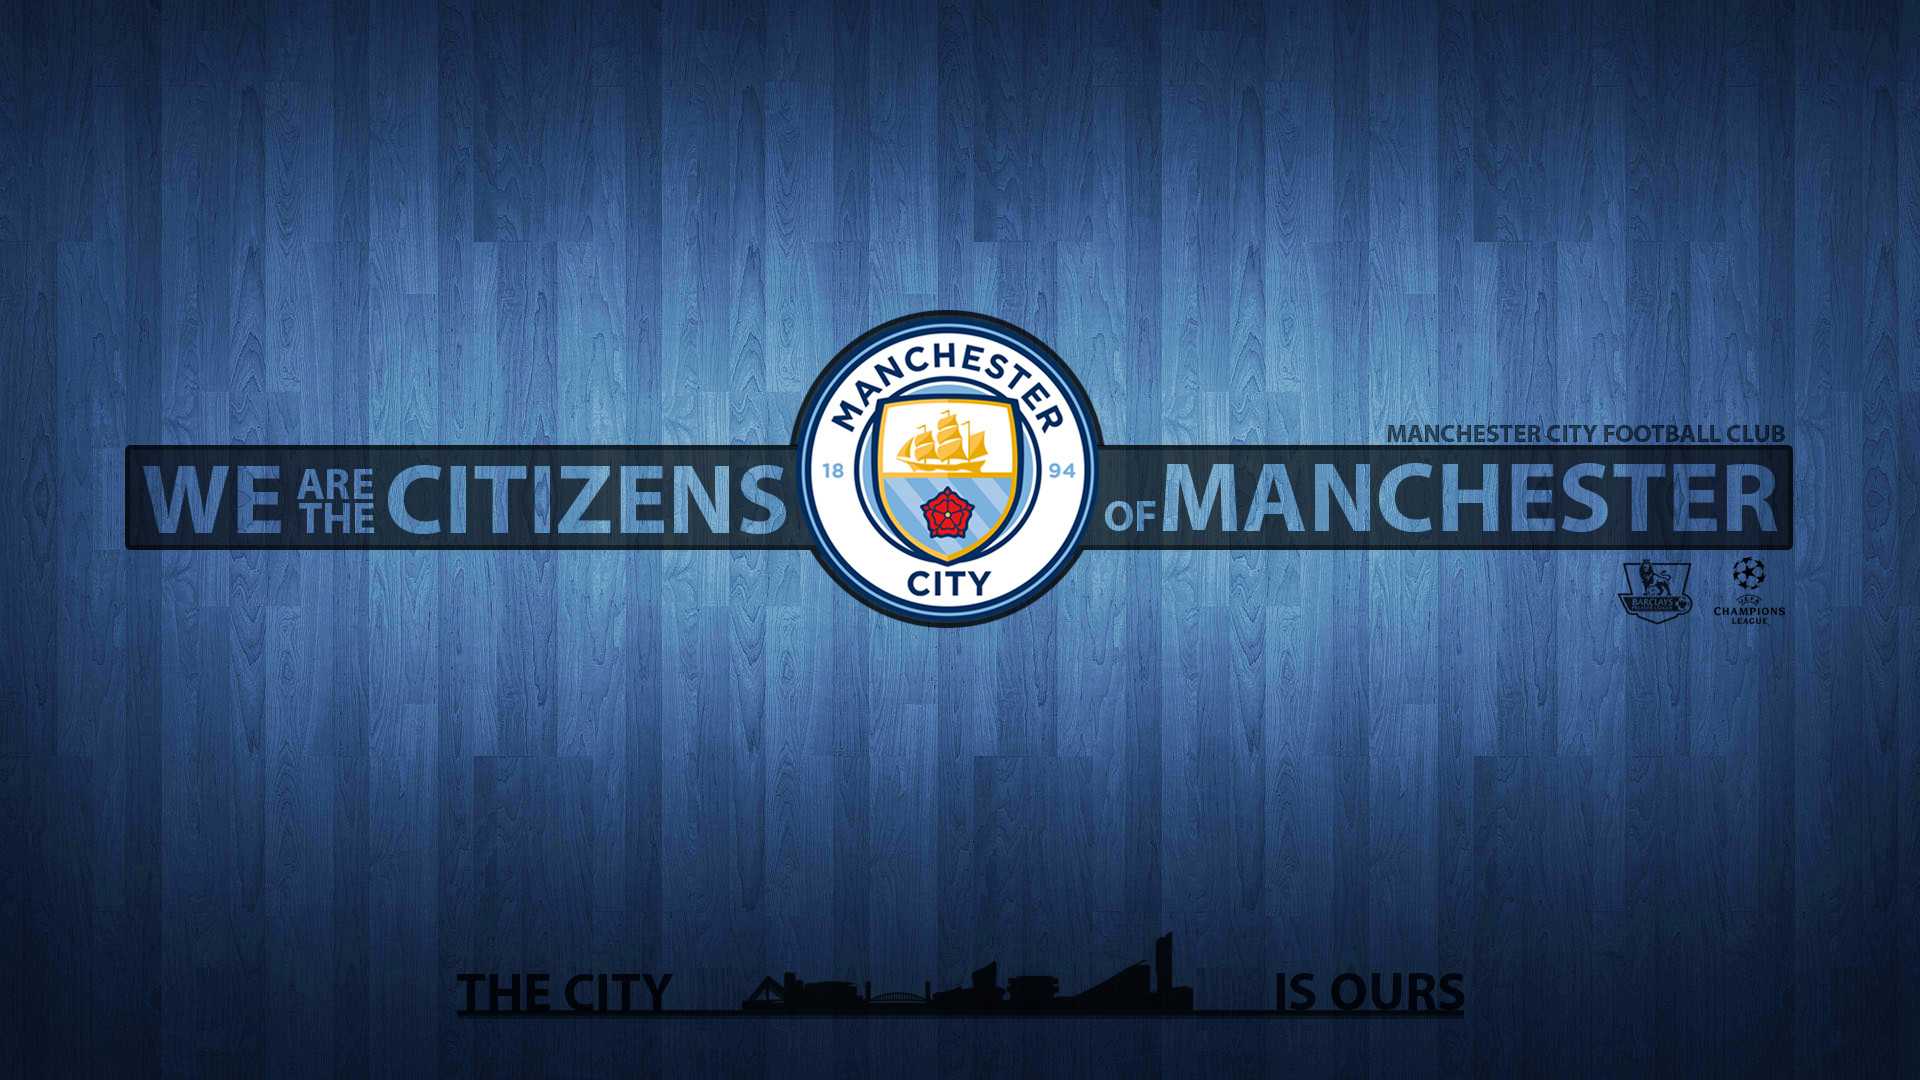 Manchester City 2018 Wallpapers Wallpaper Cave